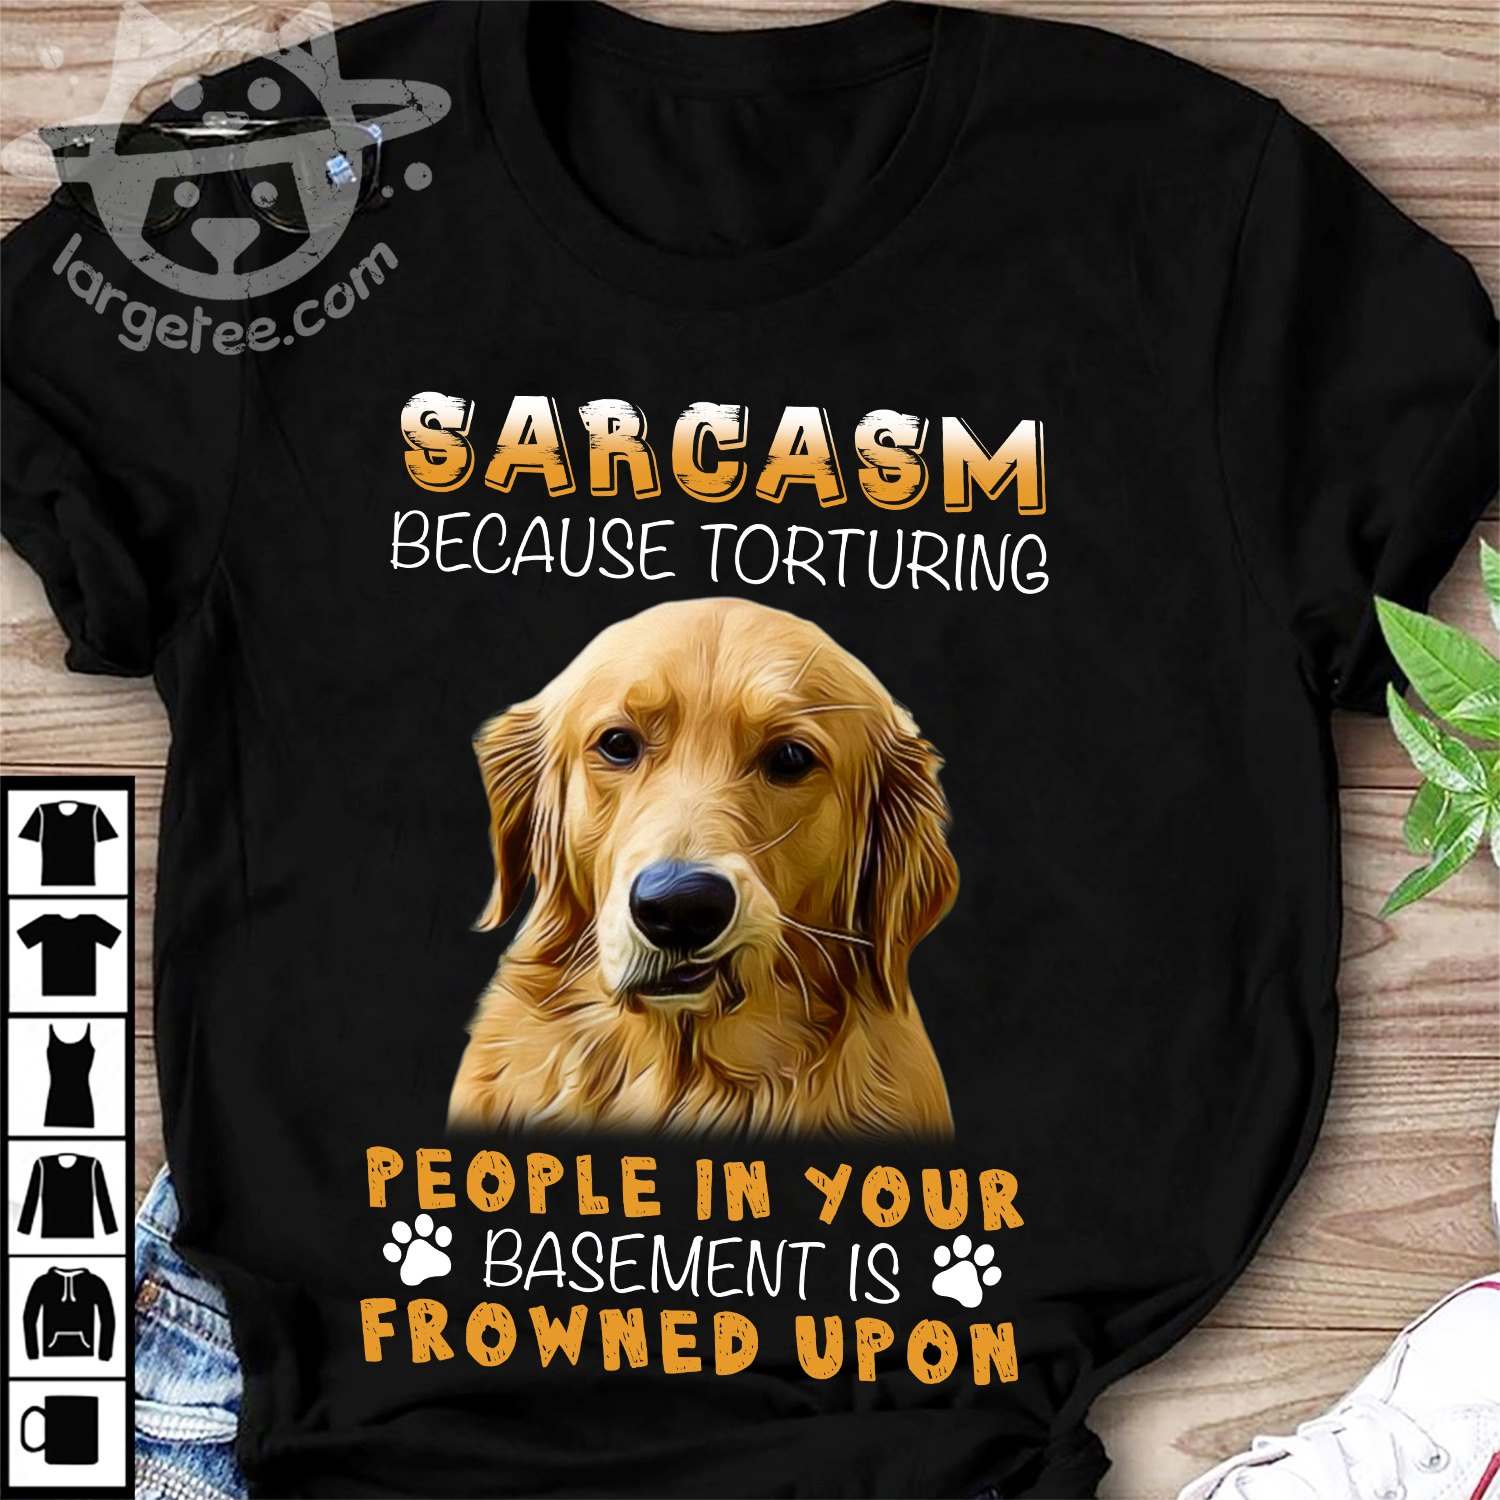 Sarcasm because torturing people in your basement is frowned upon - Golden dog